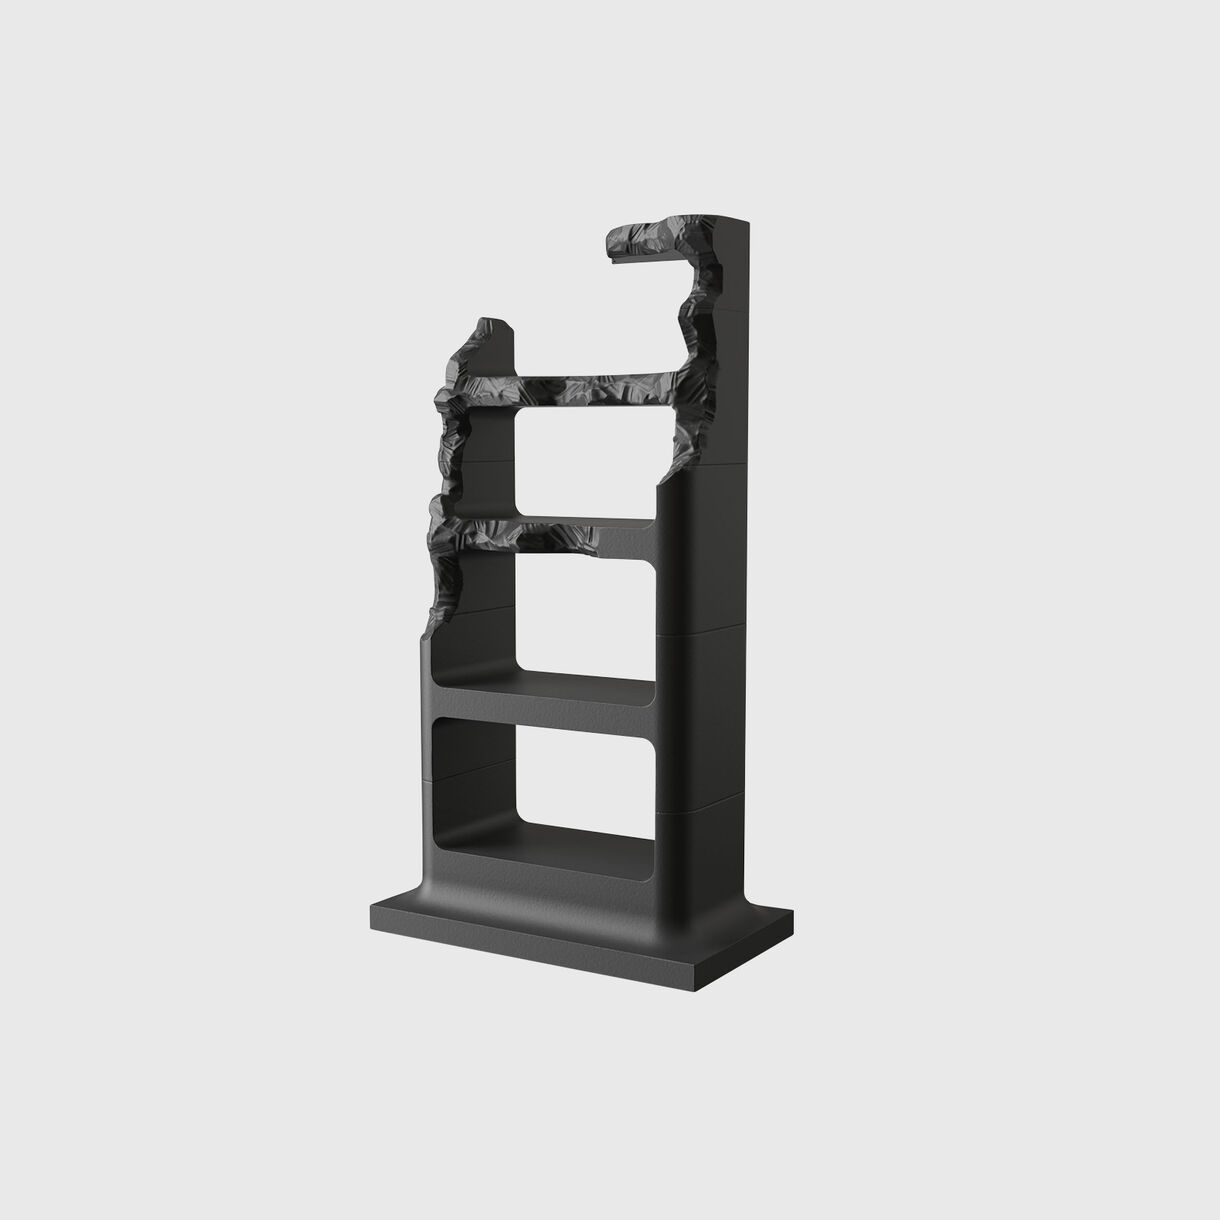 The Sculpted Series Bookshelf, Limited Edition, Black